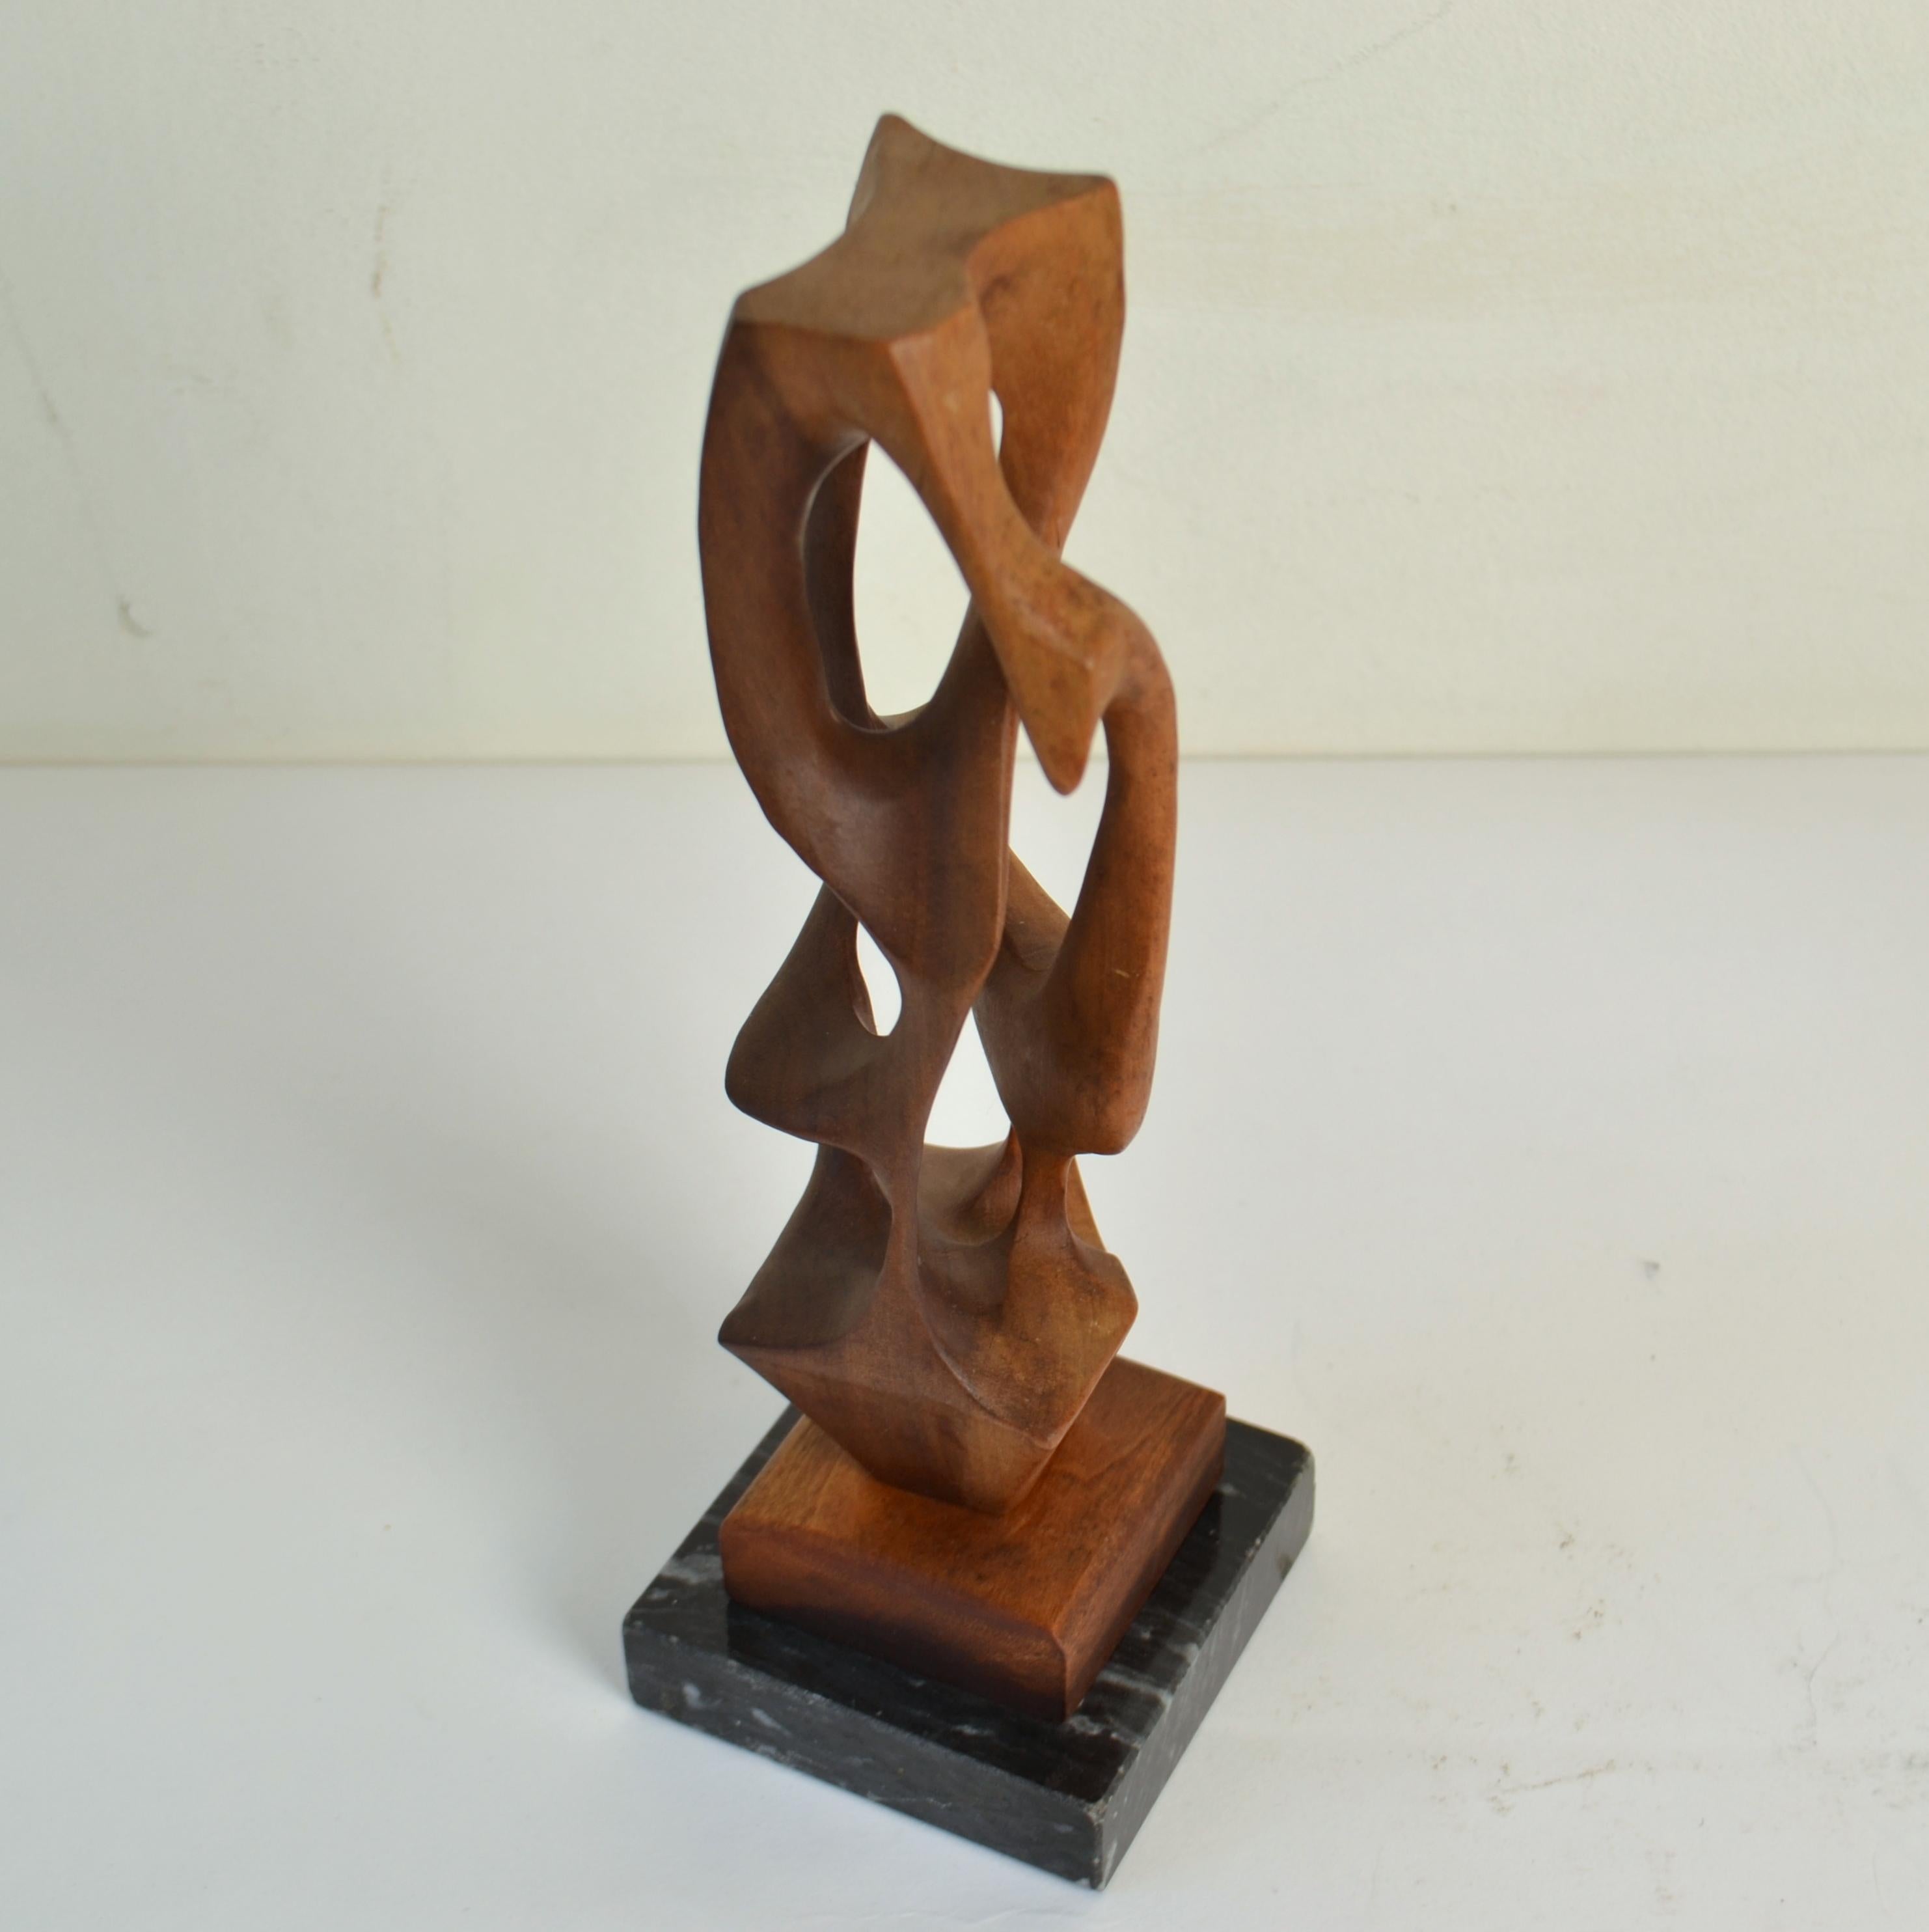 Hand Carved Biomorphic Wooden Sculptures 2